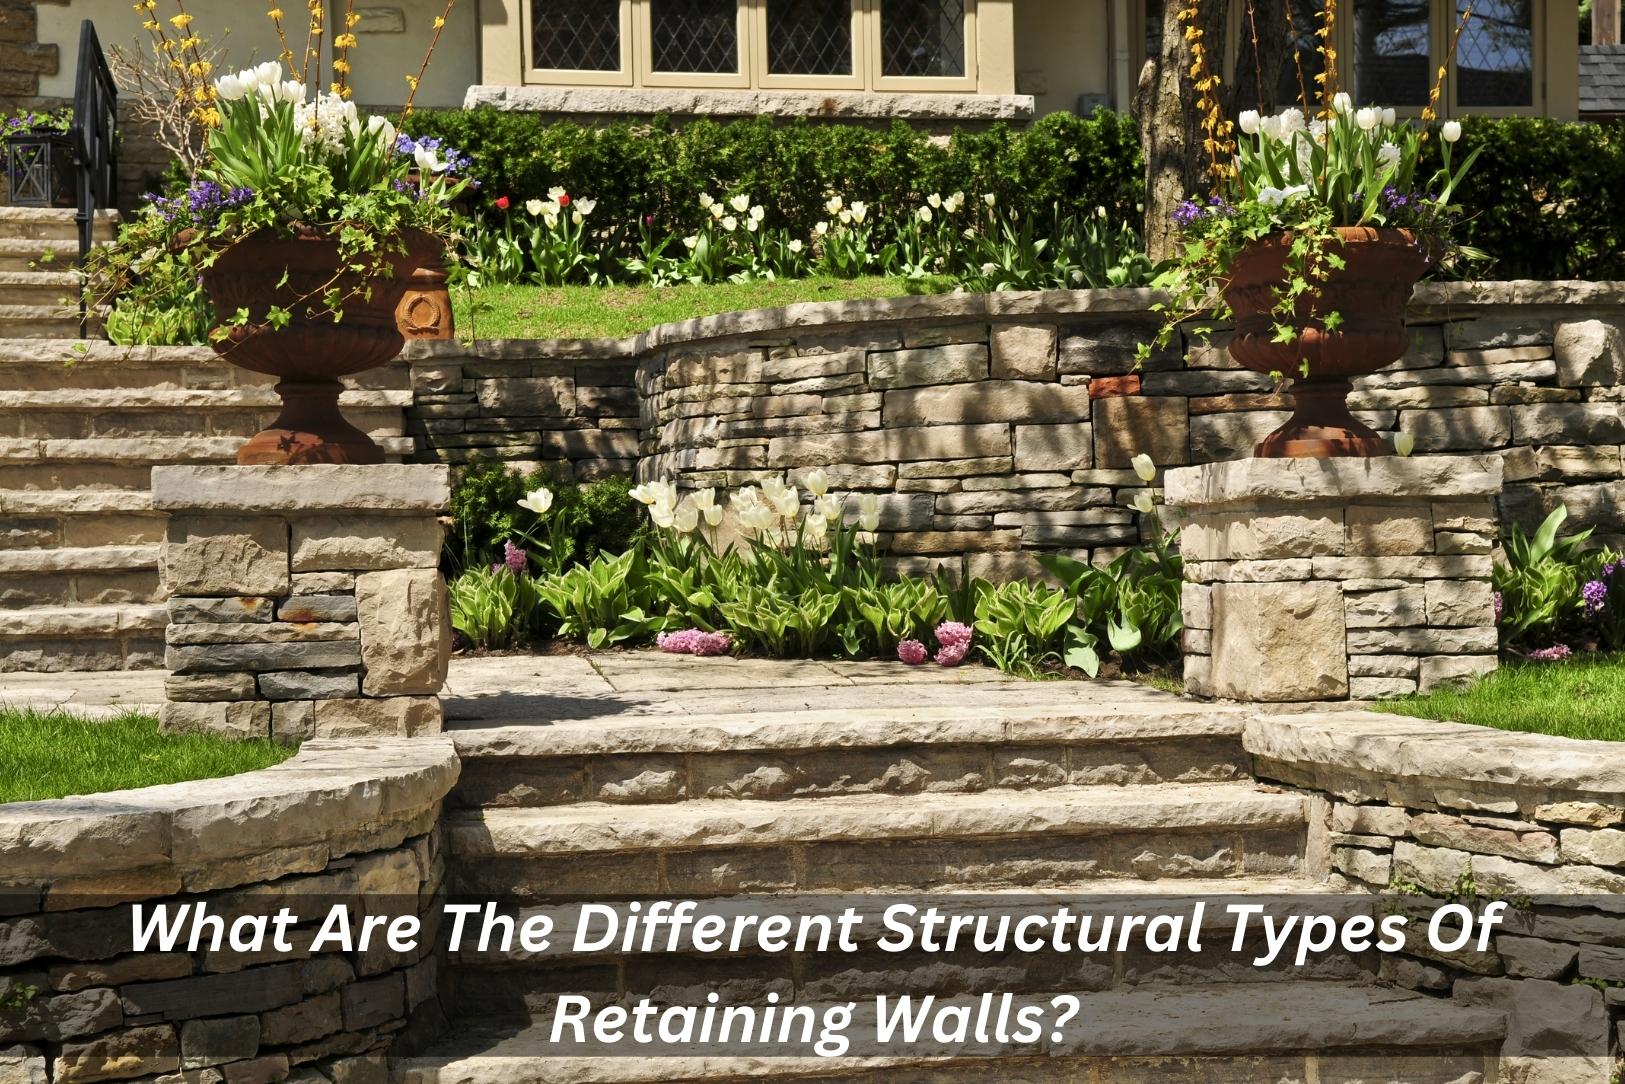 Image presents What Are The Different Structural Types Of Retaining Walls - Stone Retaining Wall